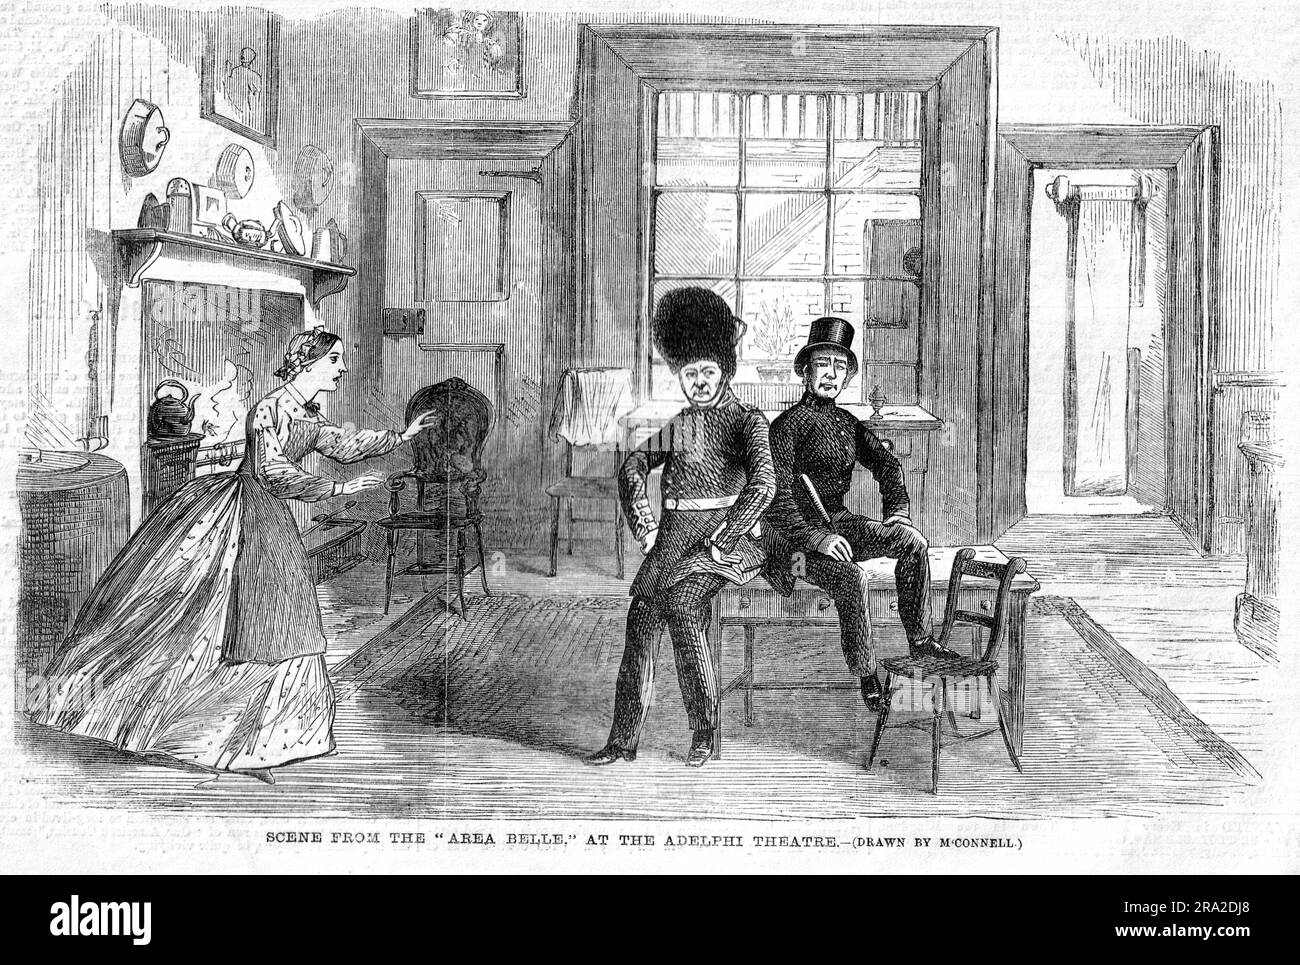 Scene from The 'Area Belle' at the Adelphi Theatre drawn by McConnell Stock Photo